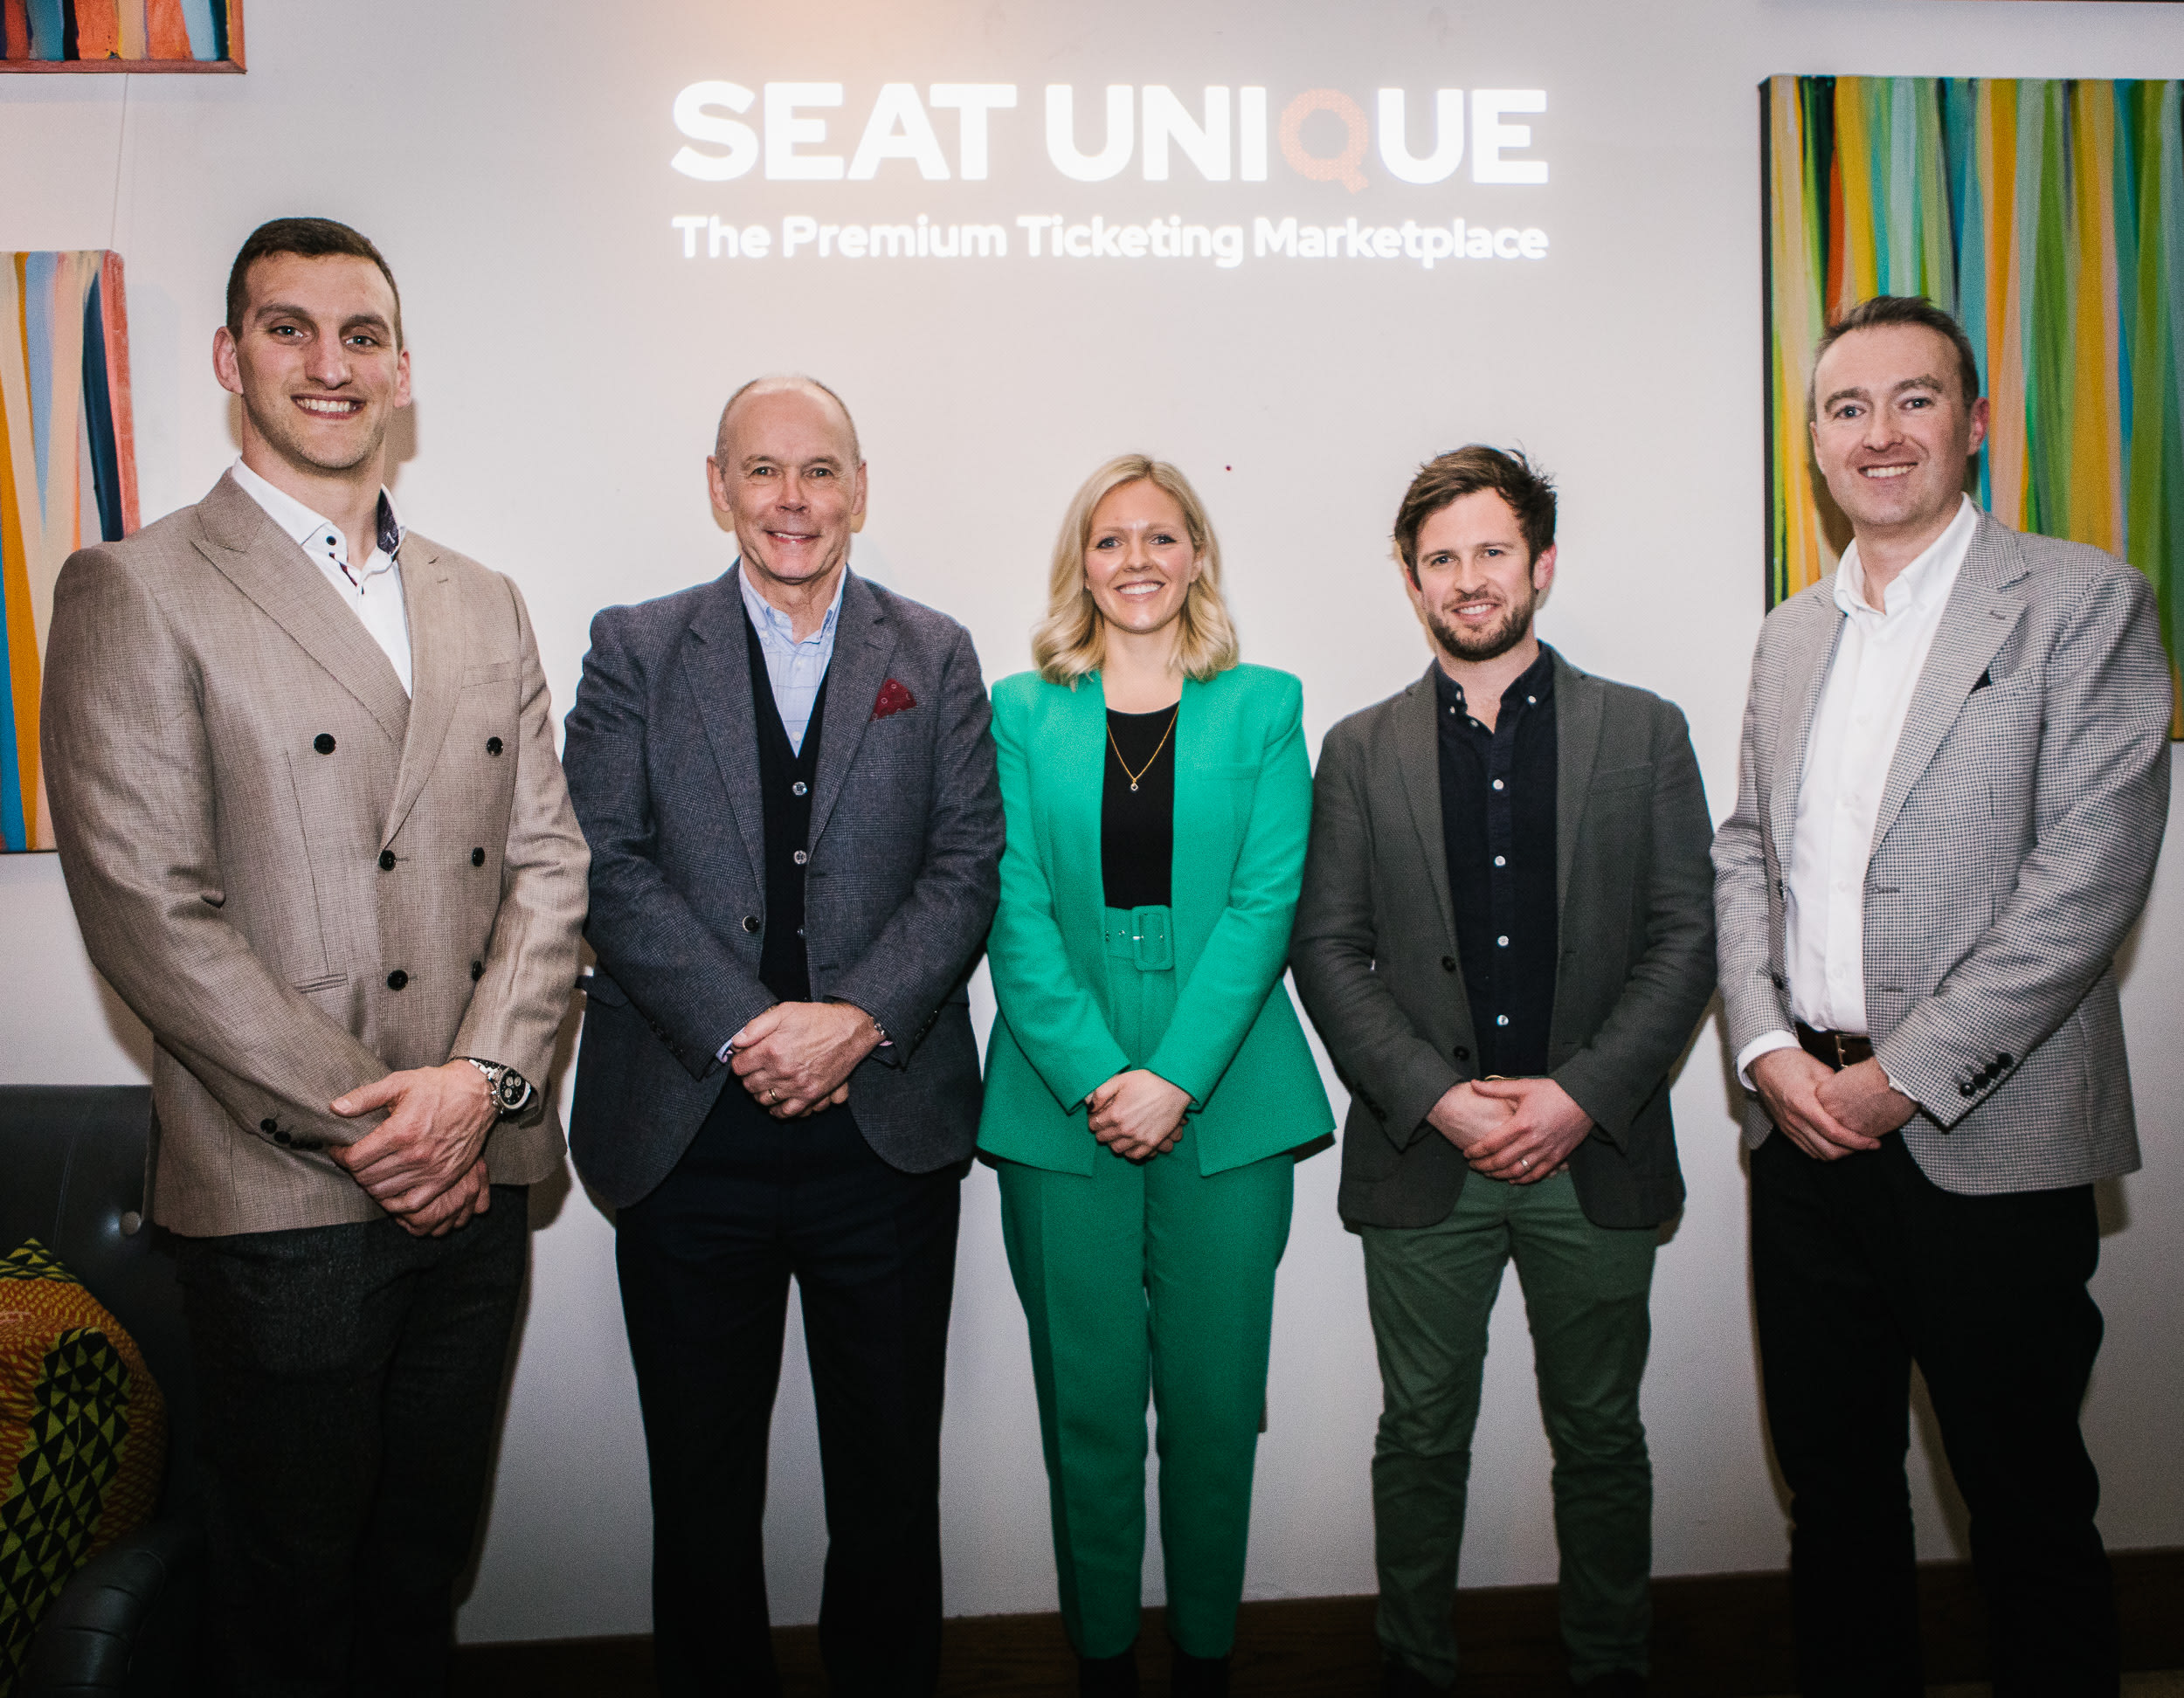 Sam Warburton, Sir Clive Woodward OBE, Seat Unique Co-Founder and Head of Product Phillipa Hicks, Legal Strategist James Duffy and CEO and Founder Robin Sherry